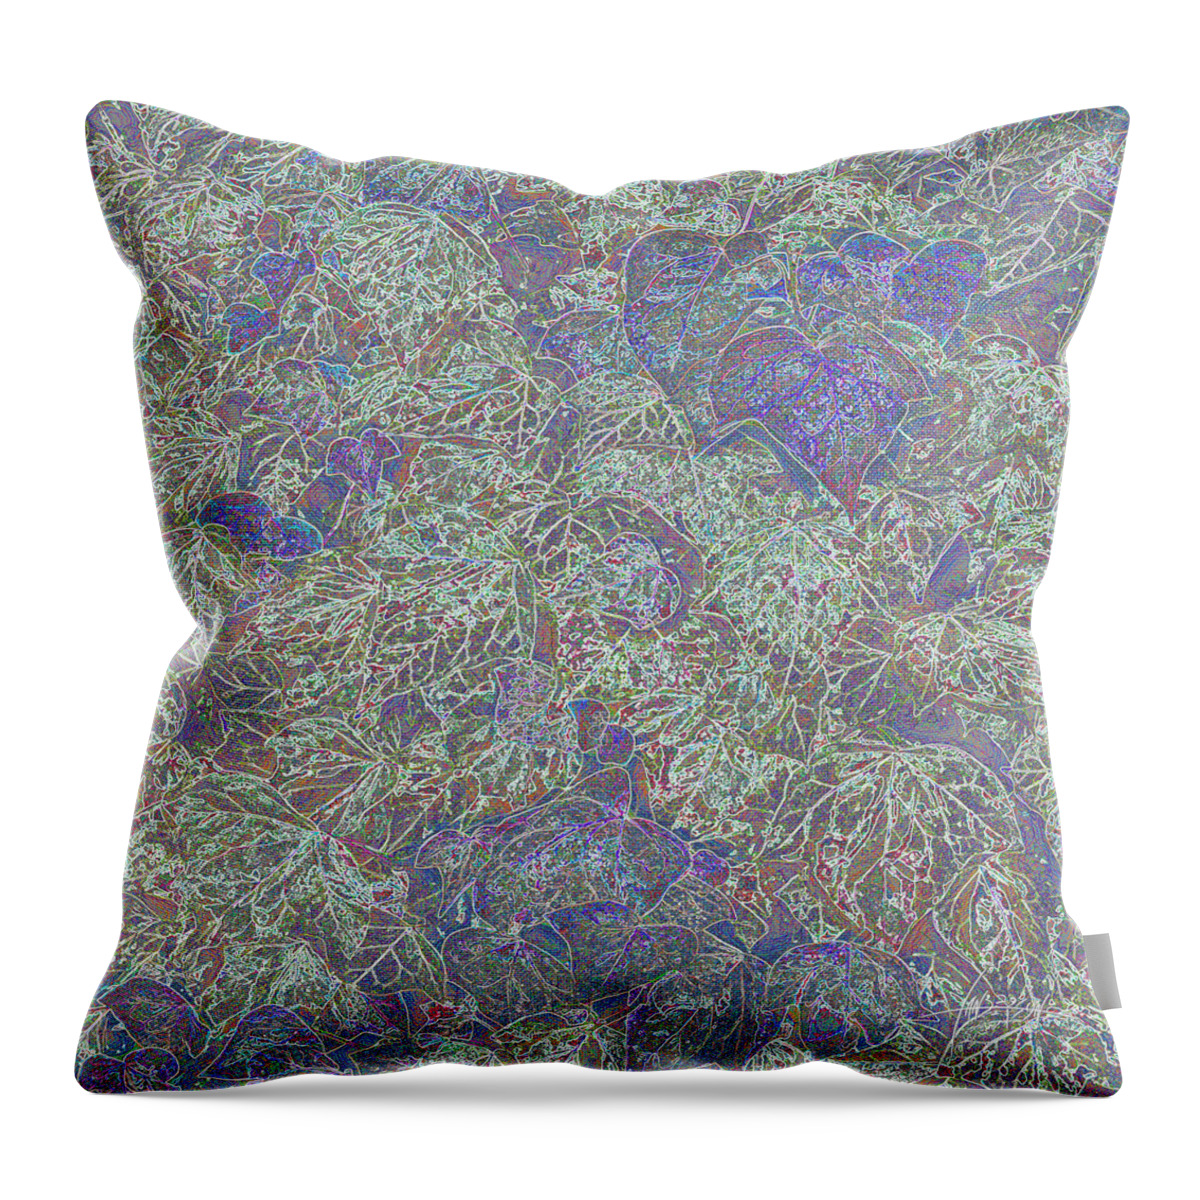 Digital Art Throw Pillow featuring the digital art Photosynthesis in Blue by Ian Anderson